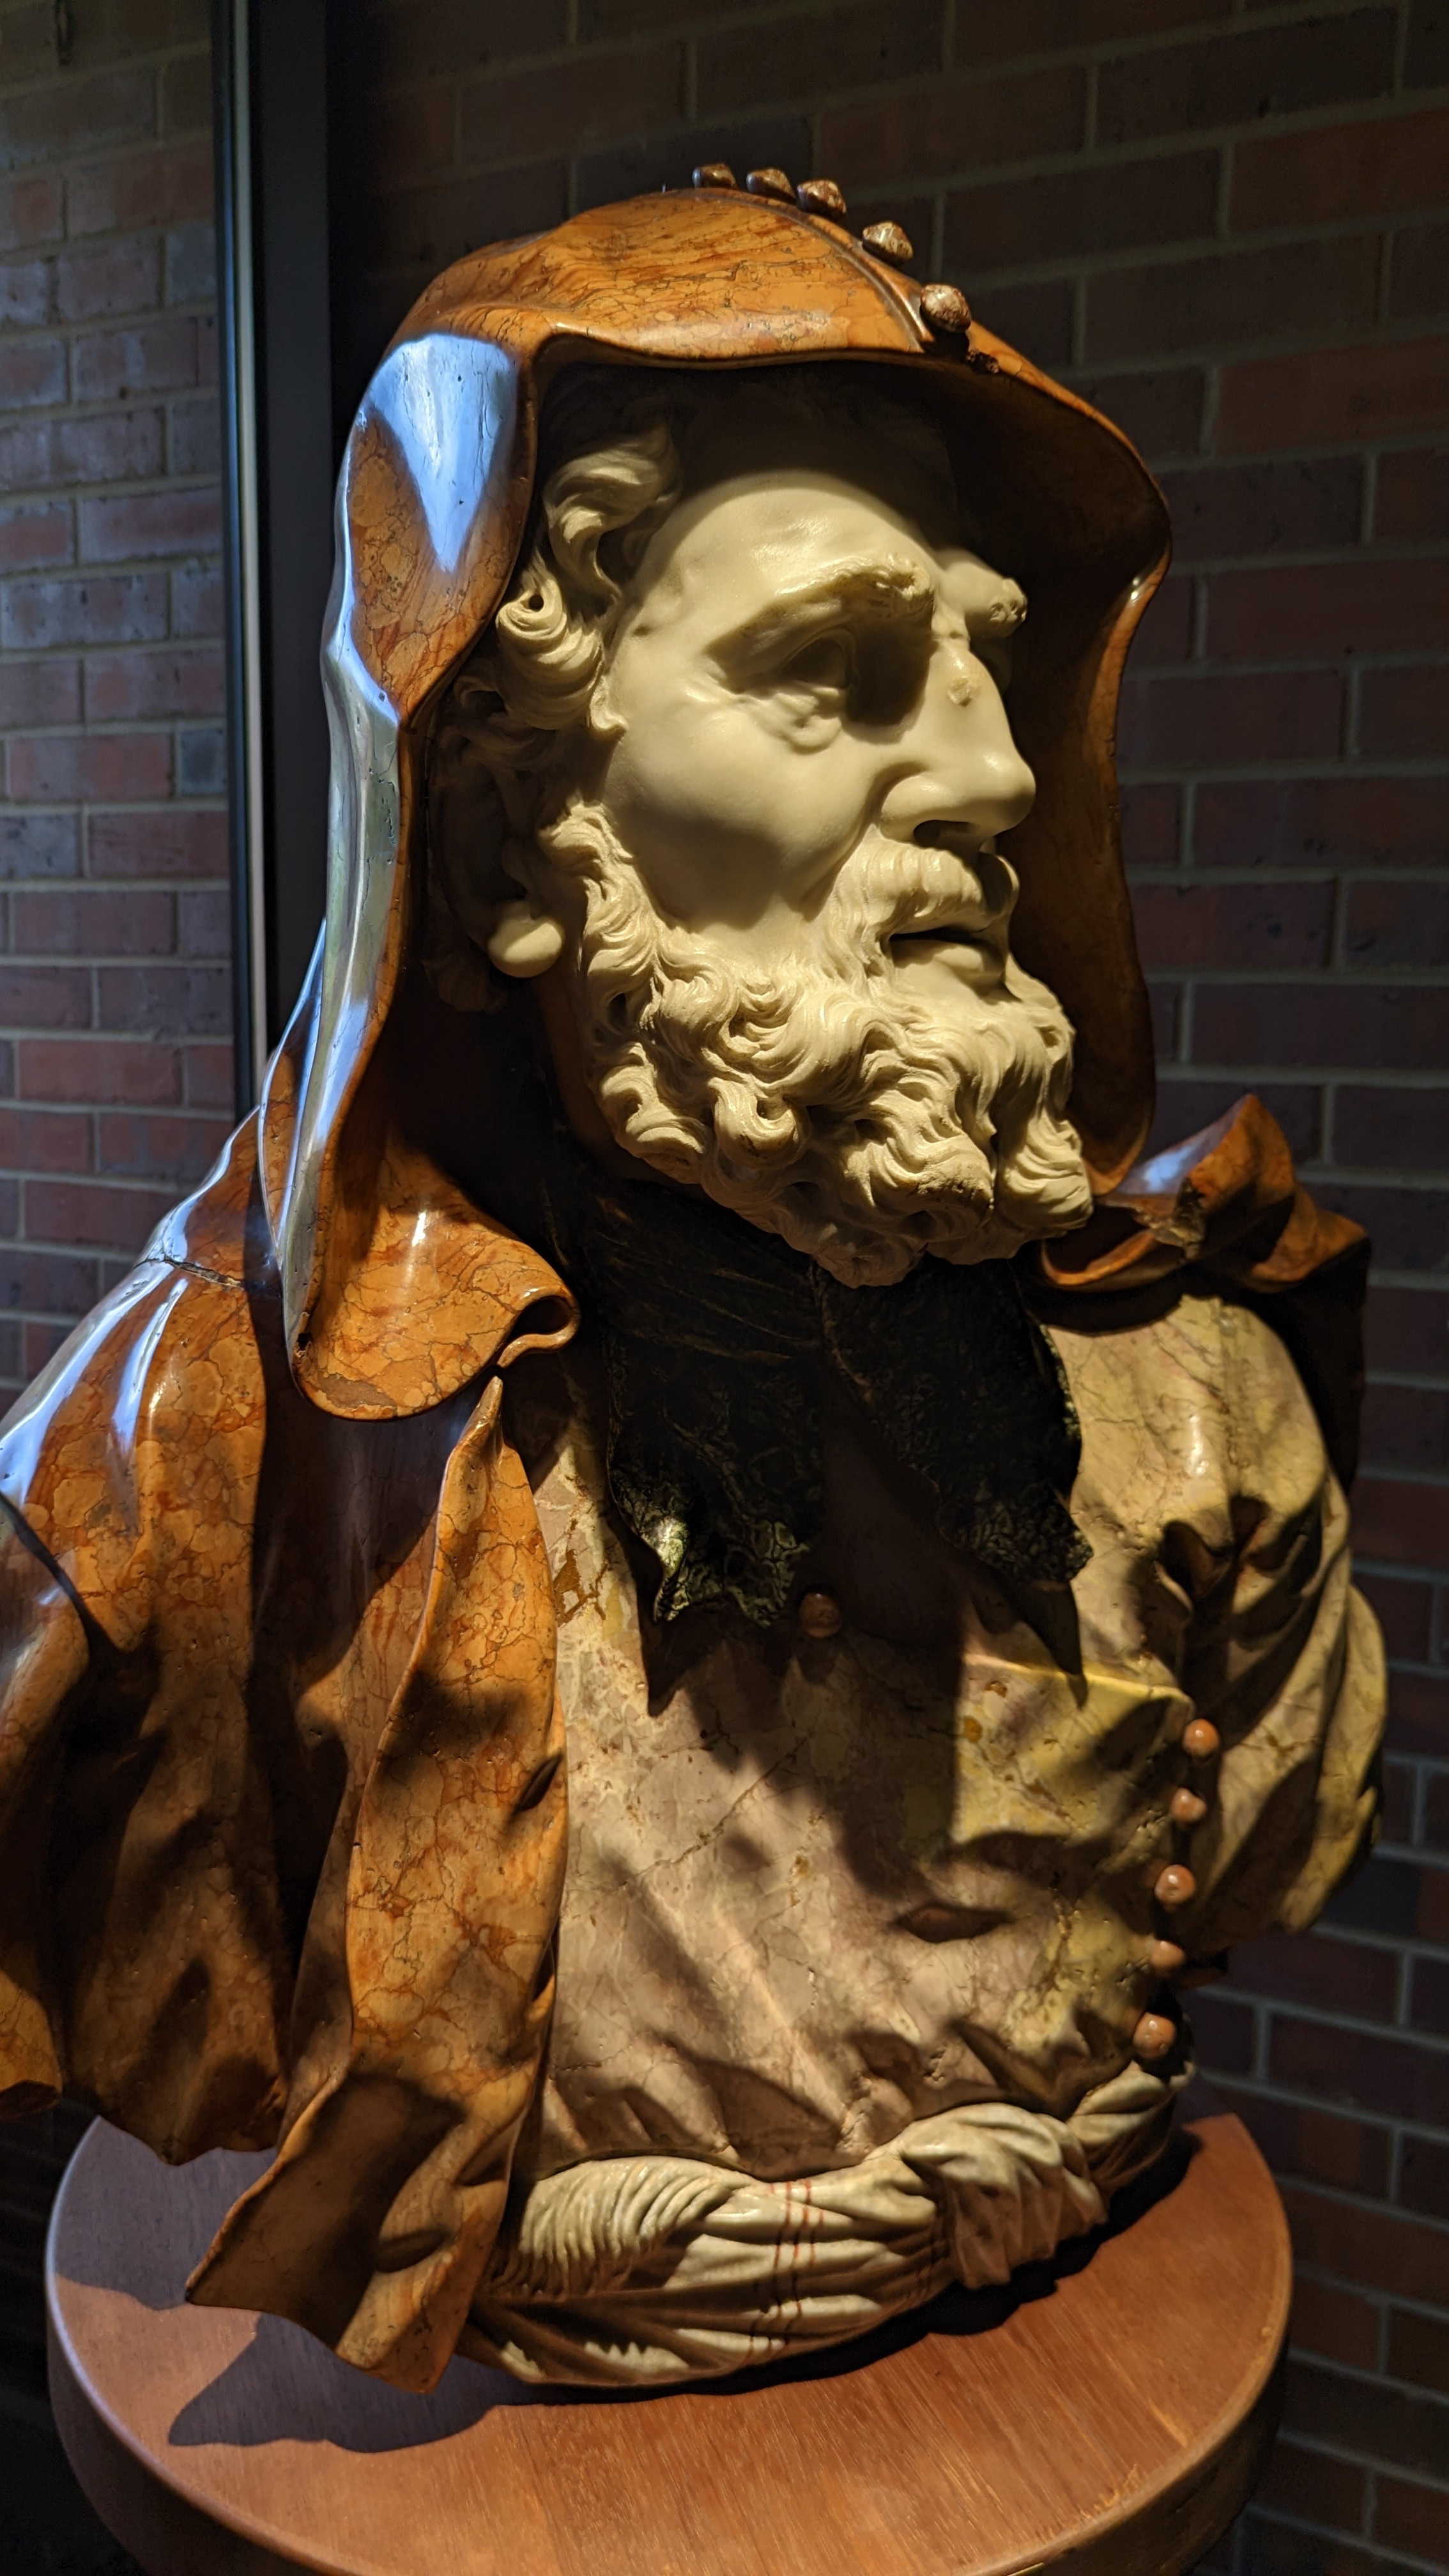 A portrait of the Rigoletto statue, close up. Showcases the details of the statue's face a hood with strong shadows accenting the photo